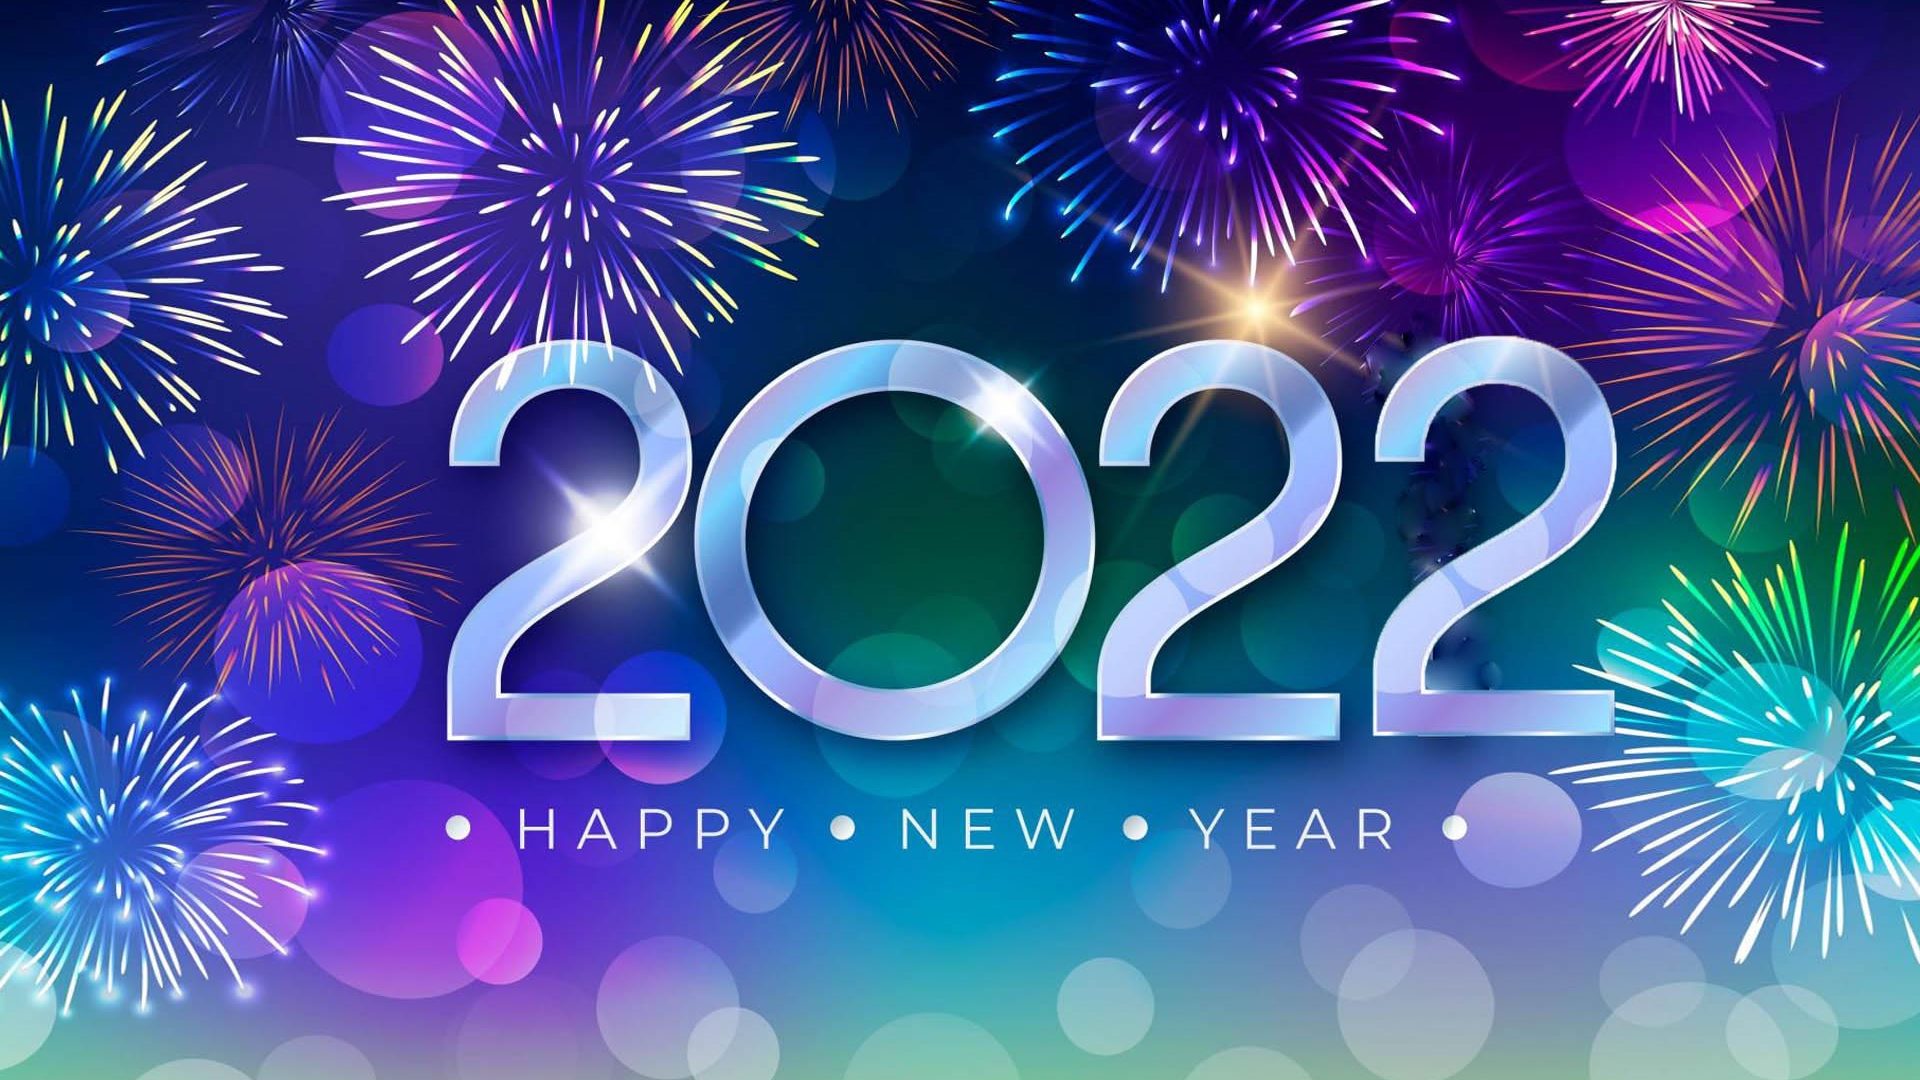 Happy New Year 2022 Blue Hd Wallpaper For Laptop And Tablet 1920x1080